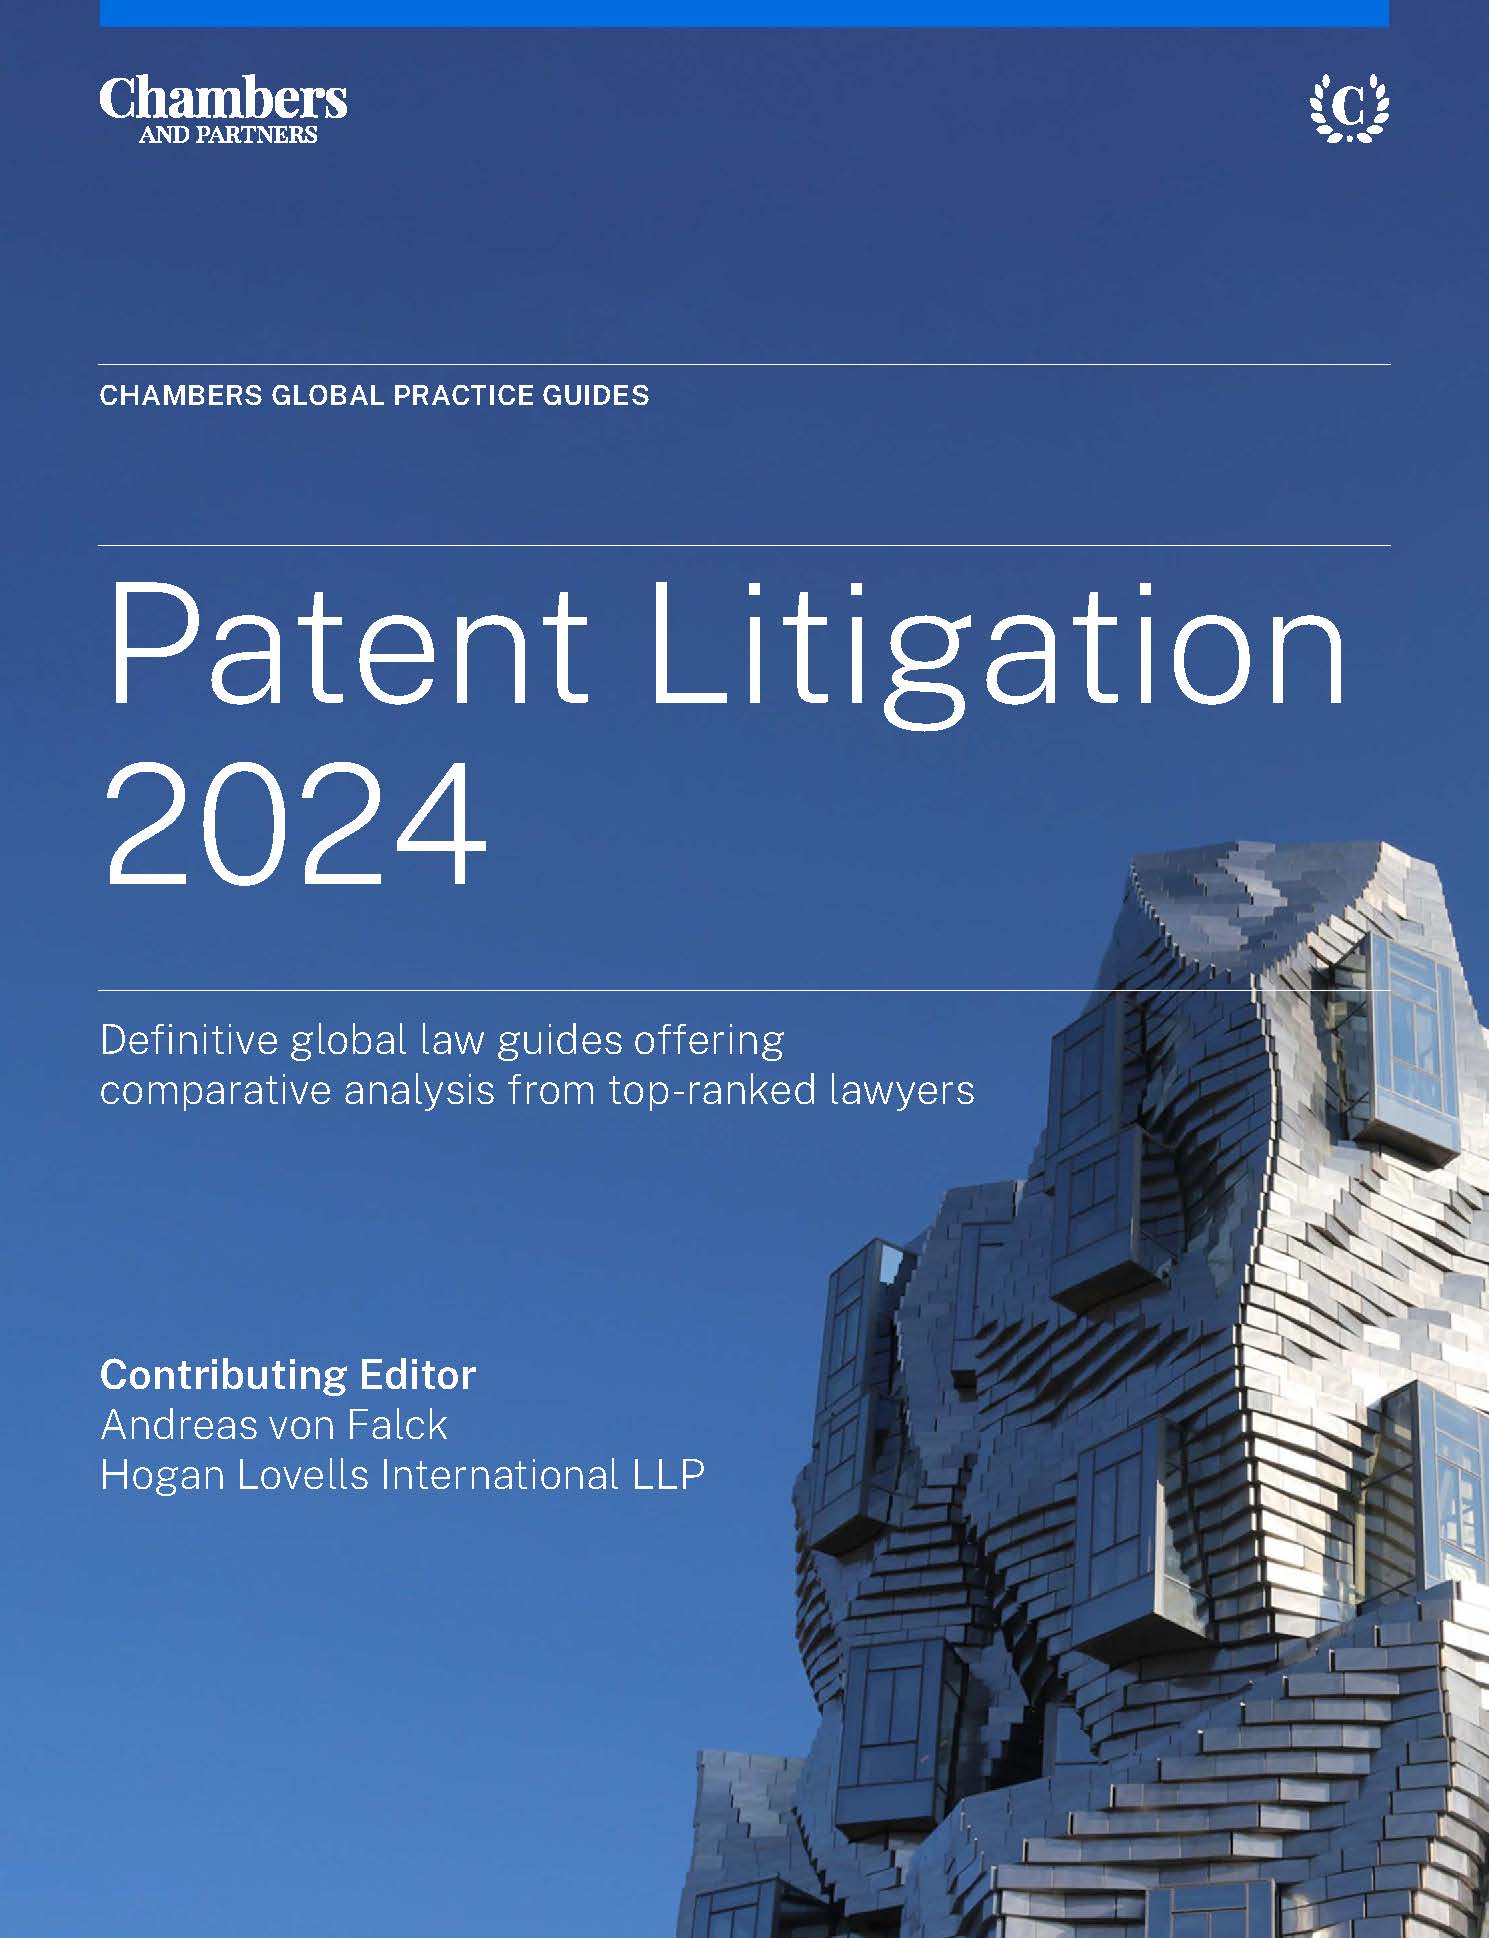 Chambers Global Practice Guides: Patent Litigation 2024 – Japan – Trends and Developments